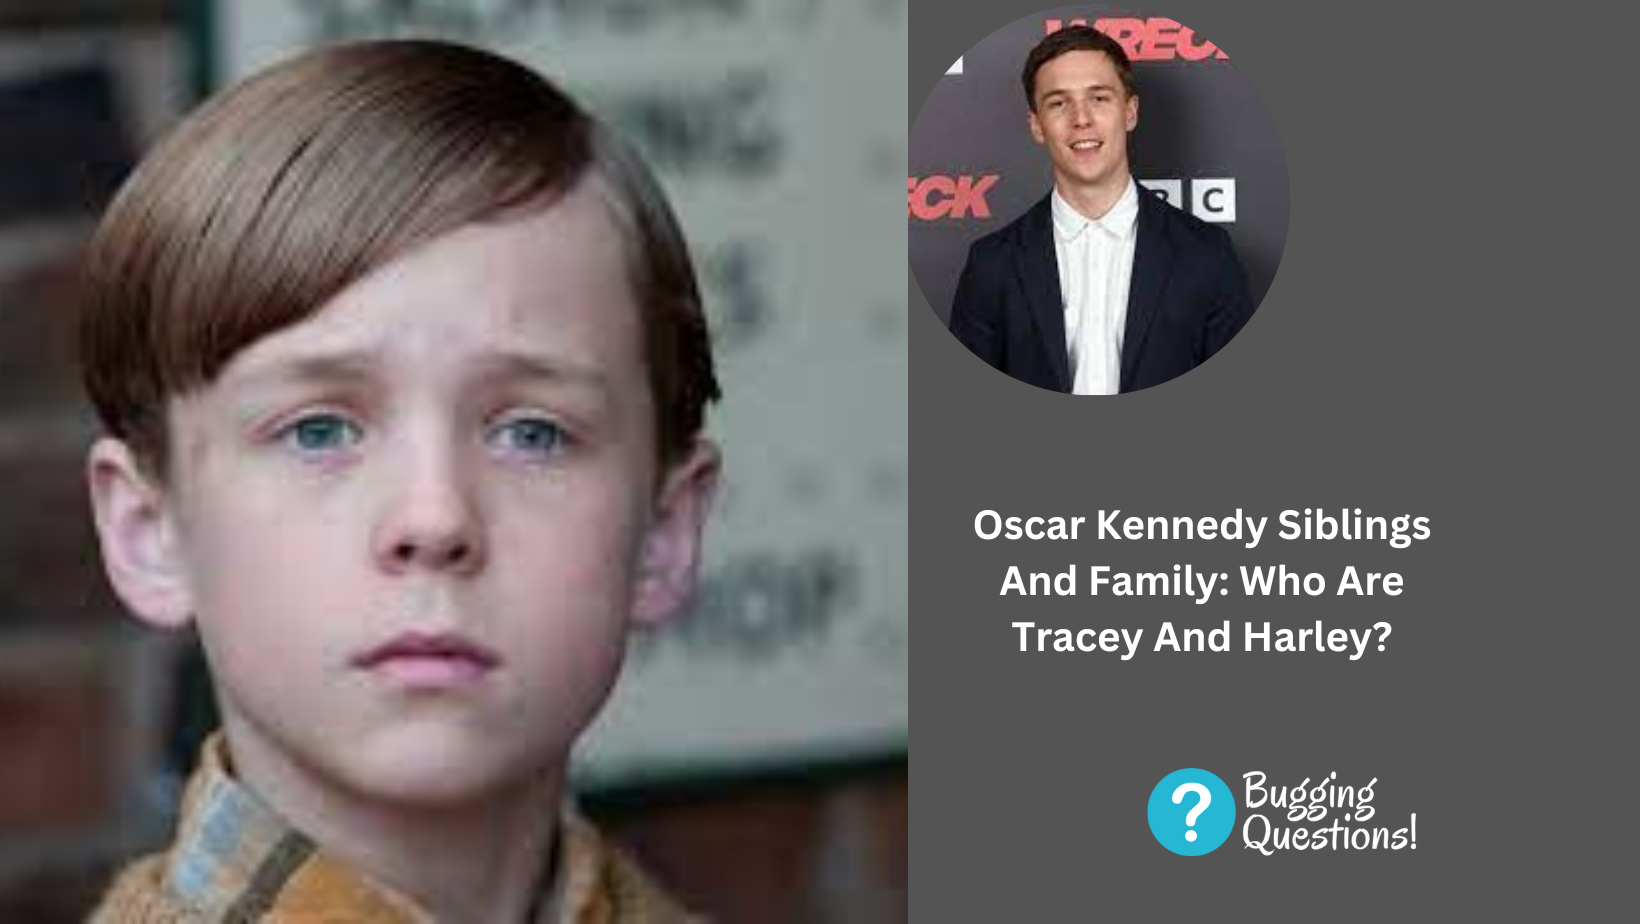 Oscar Kennedy Siblings And Family: Who Are Tracey And Harley?